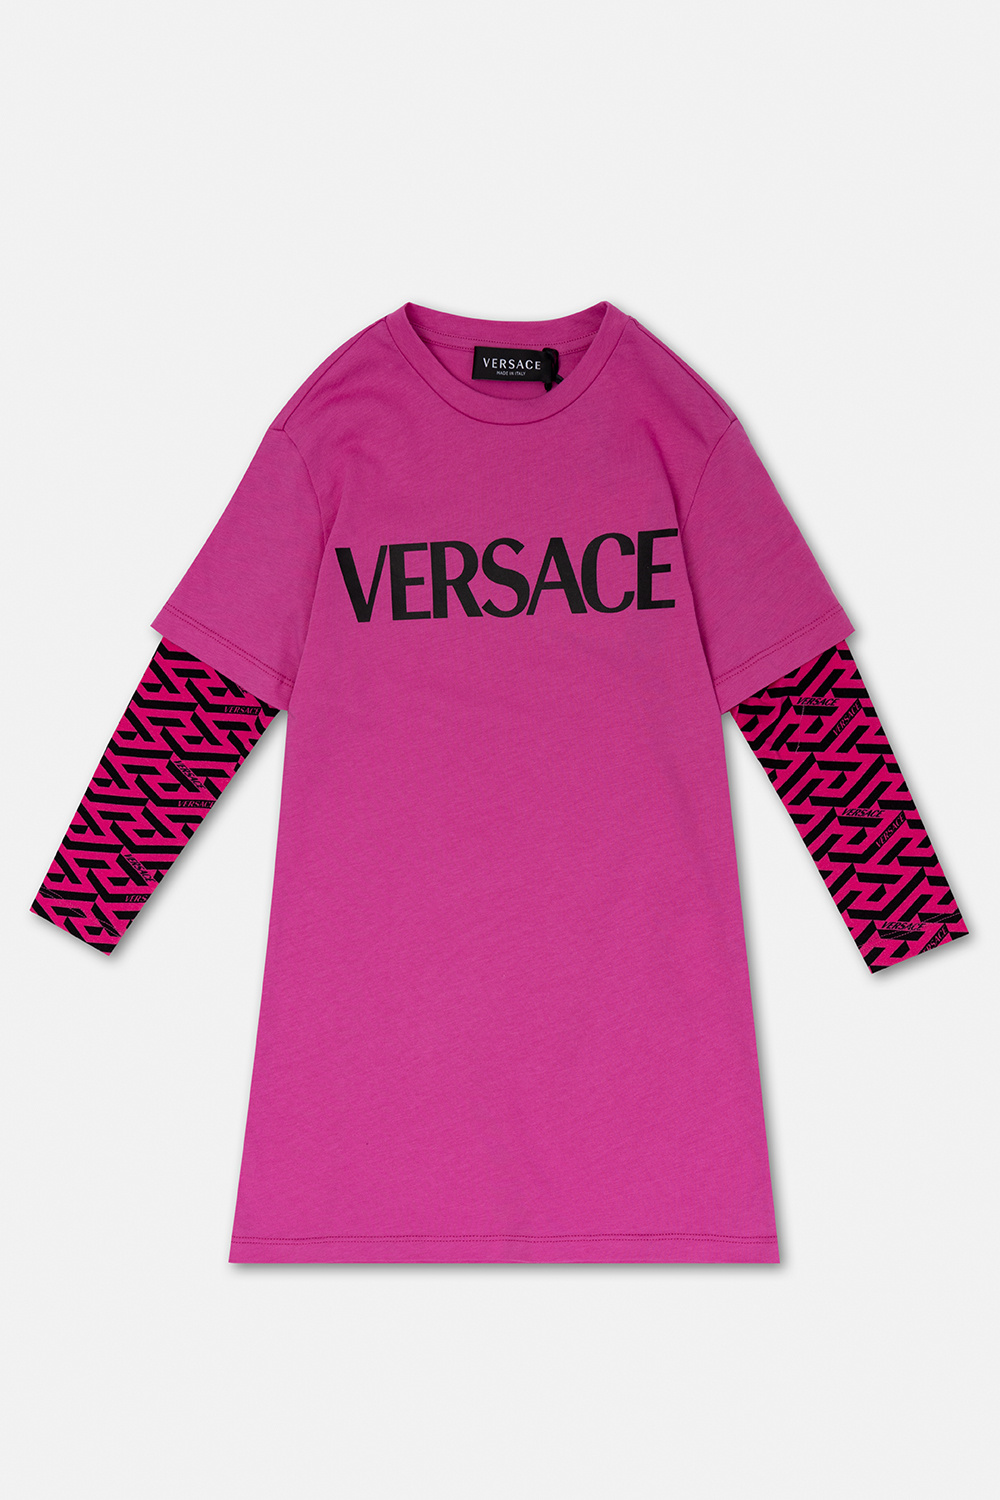 Givenchy Kids Dress with logo, Kids's Girls clothes (4-14 years)